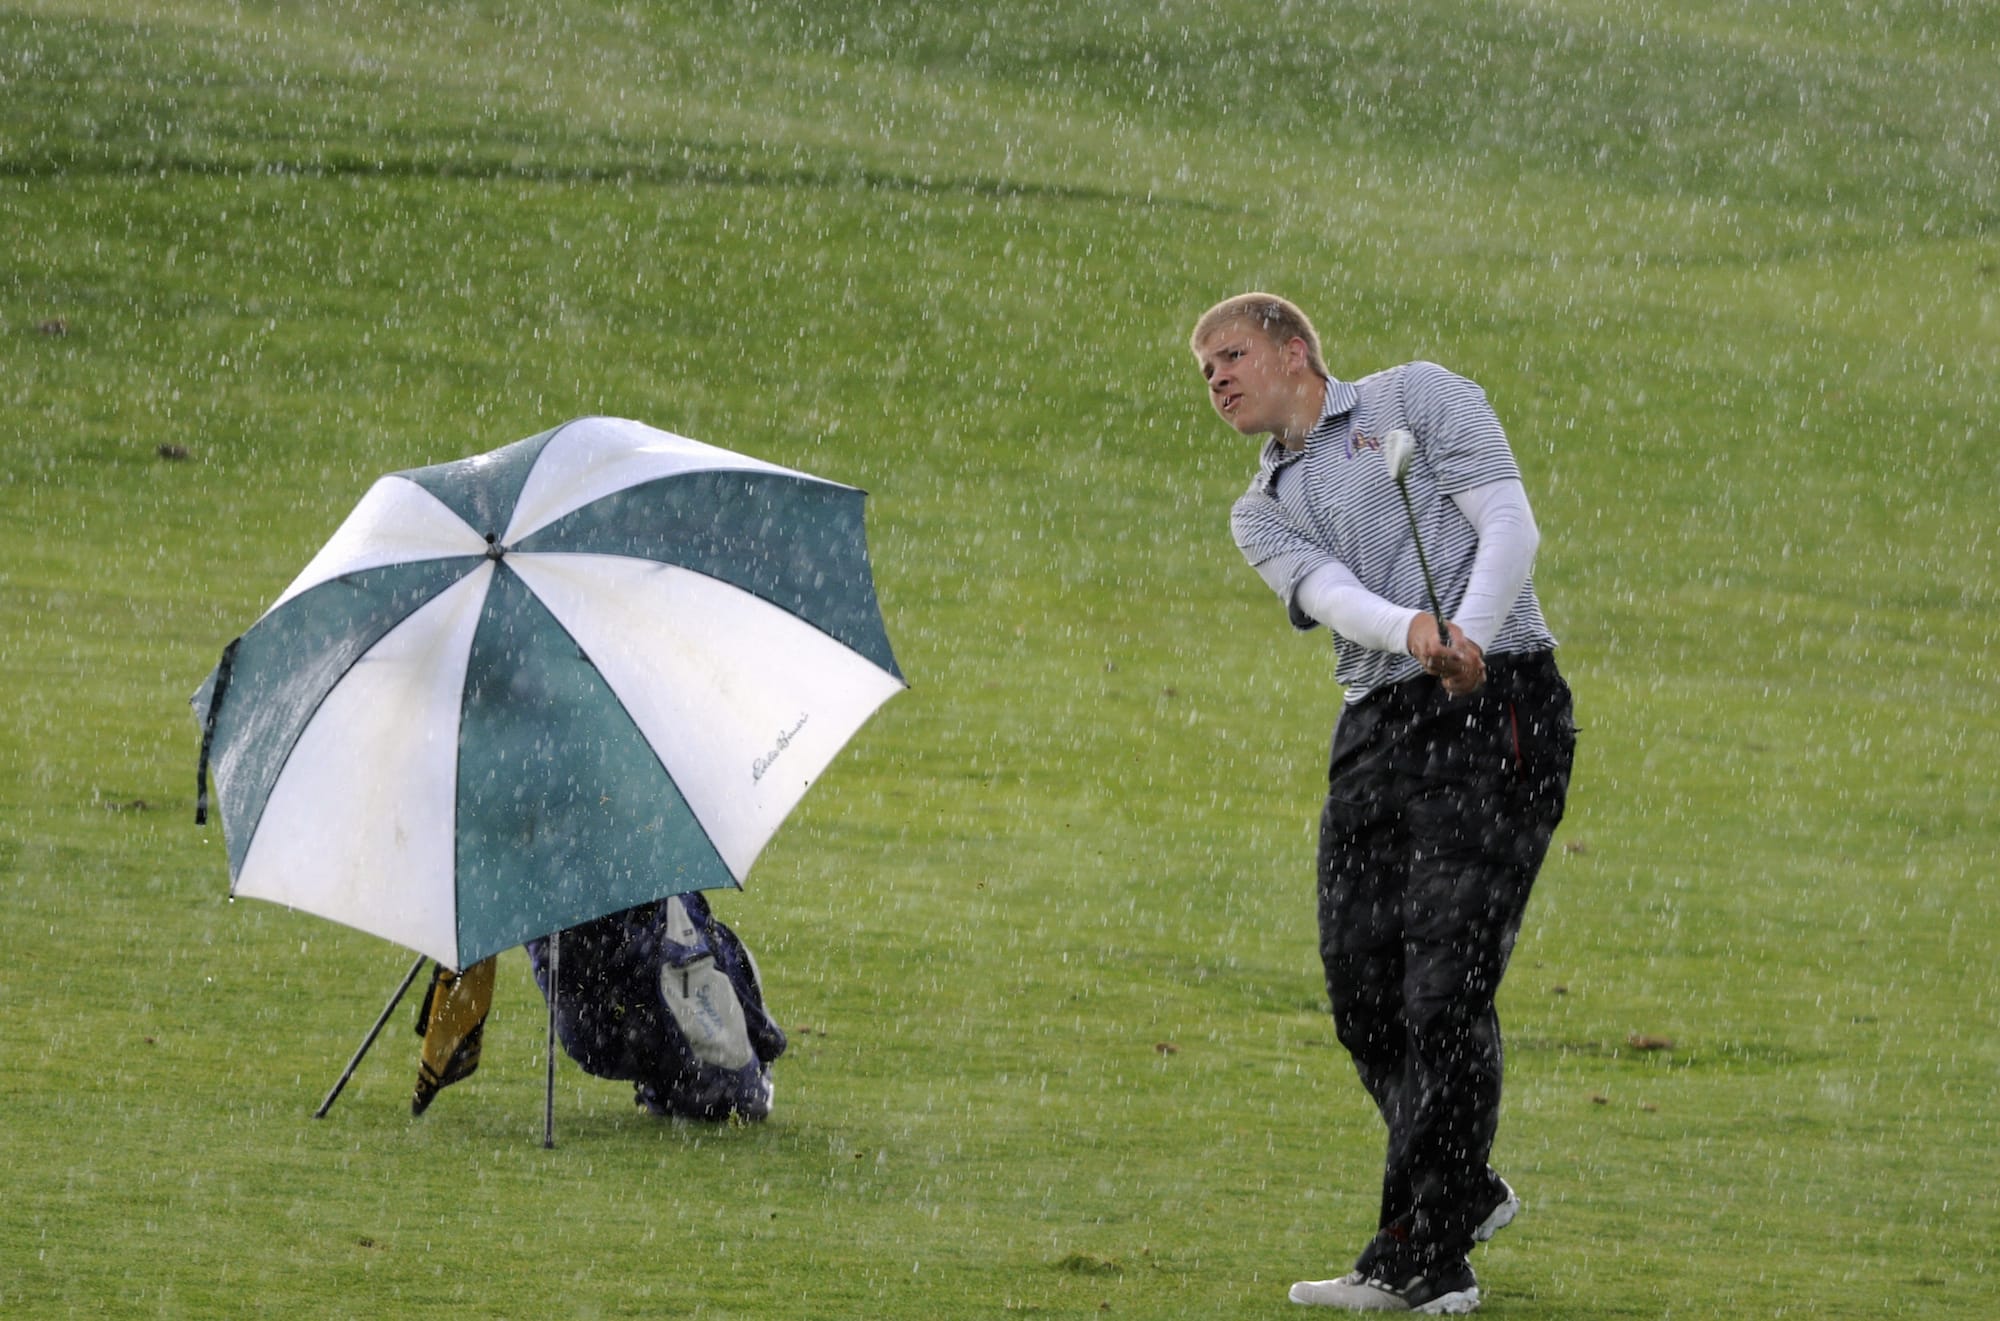 Spencer Long of Columbia River High watches his hit in a downpour as he competes in the 3A boys state golf tournament at the Tri Mountain Golf Course in Ridgefield Wa., Wednesday May 28, 2014.